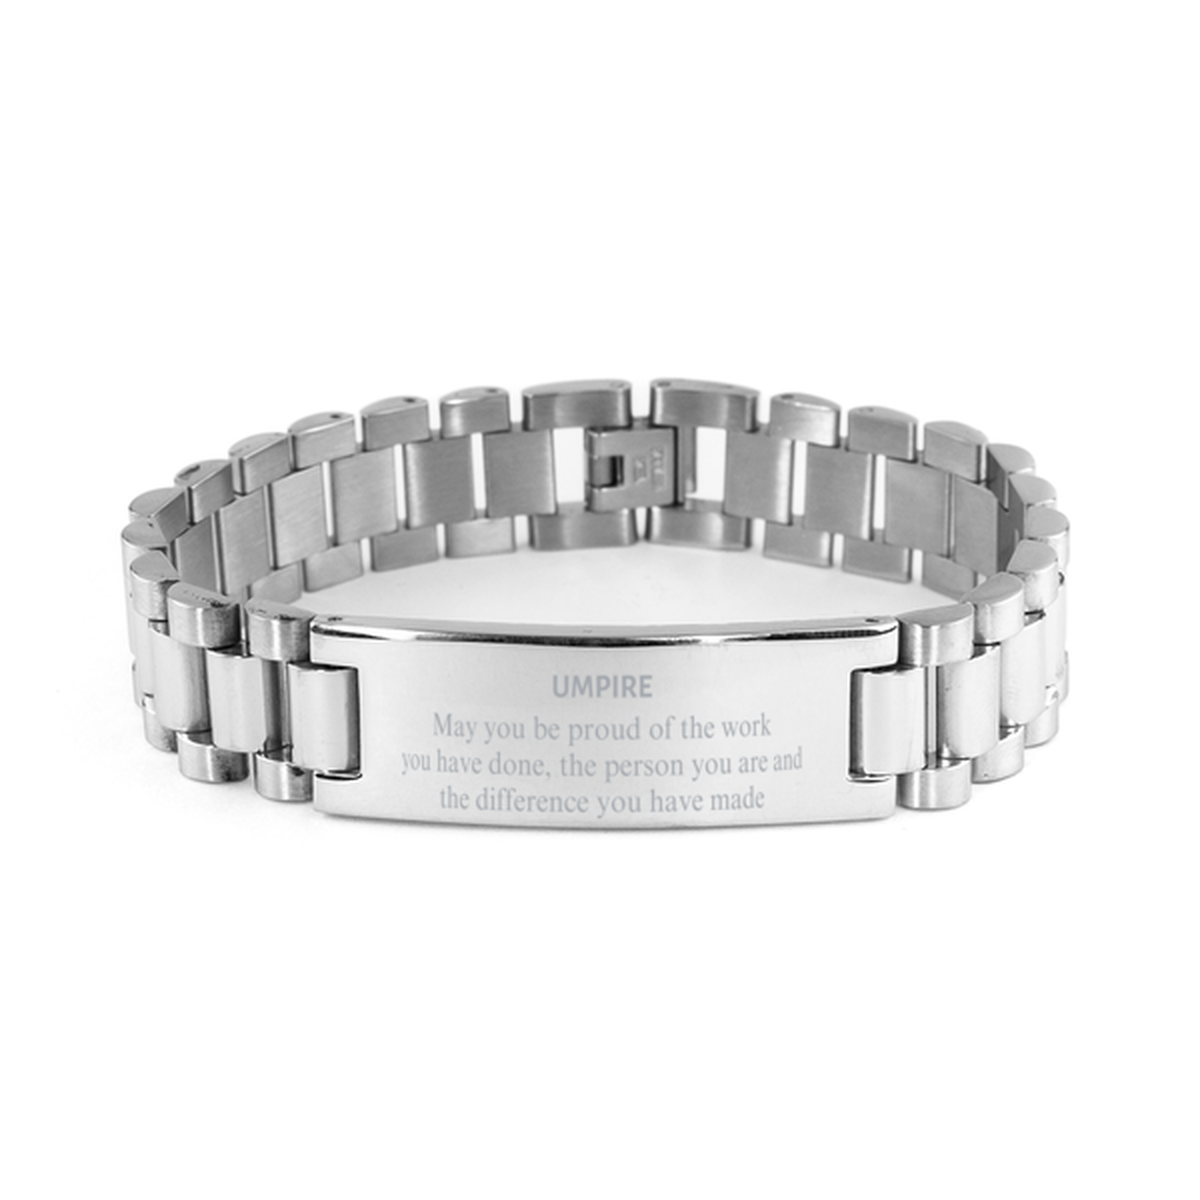 Umpire May you be proud of the work you have done, Retirement Umpire Ladder Stainless Steel Bracelet for Colleague Appreciation Gifts Amazing for Umpire